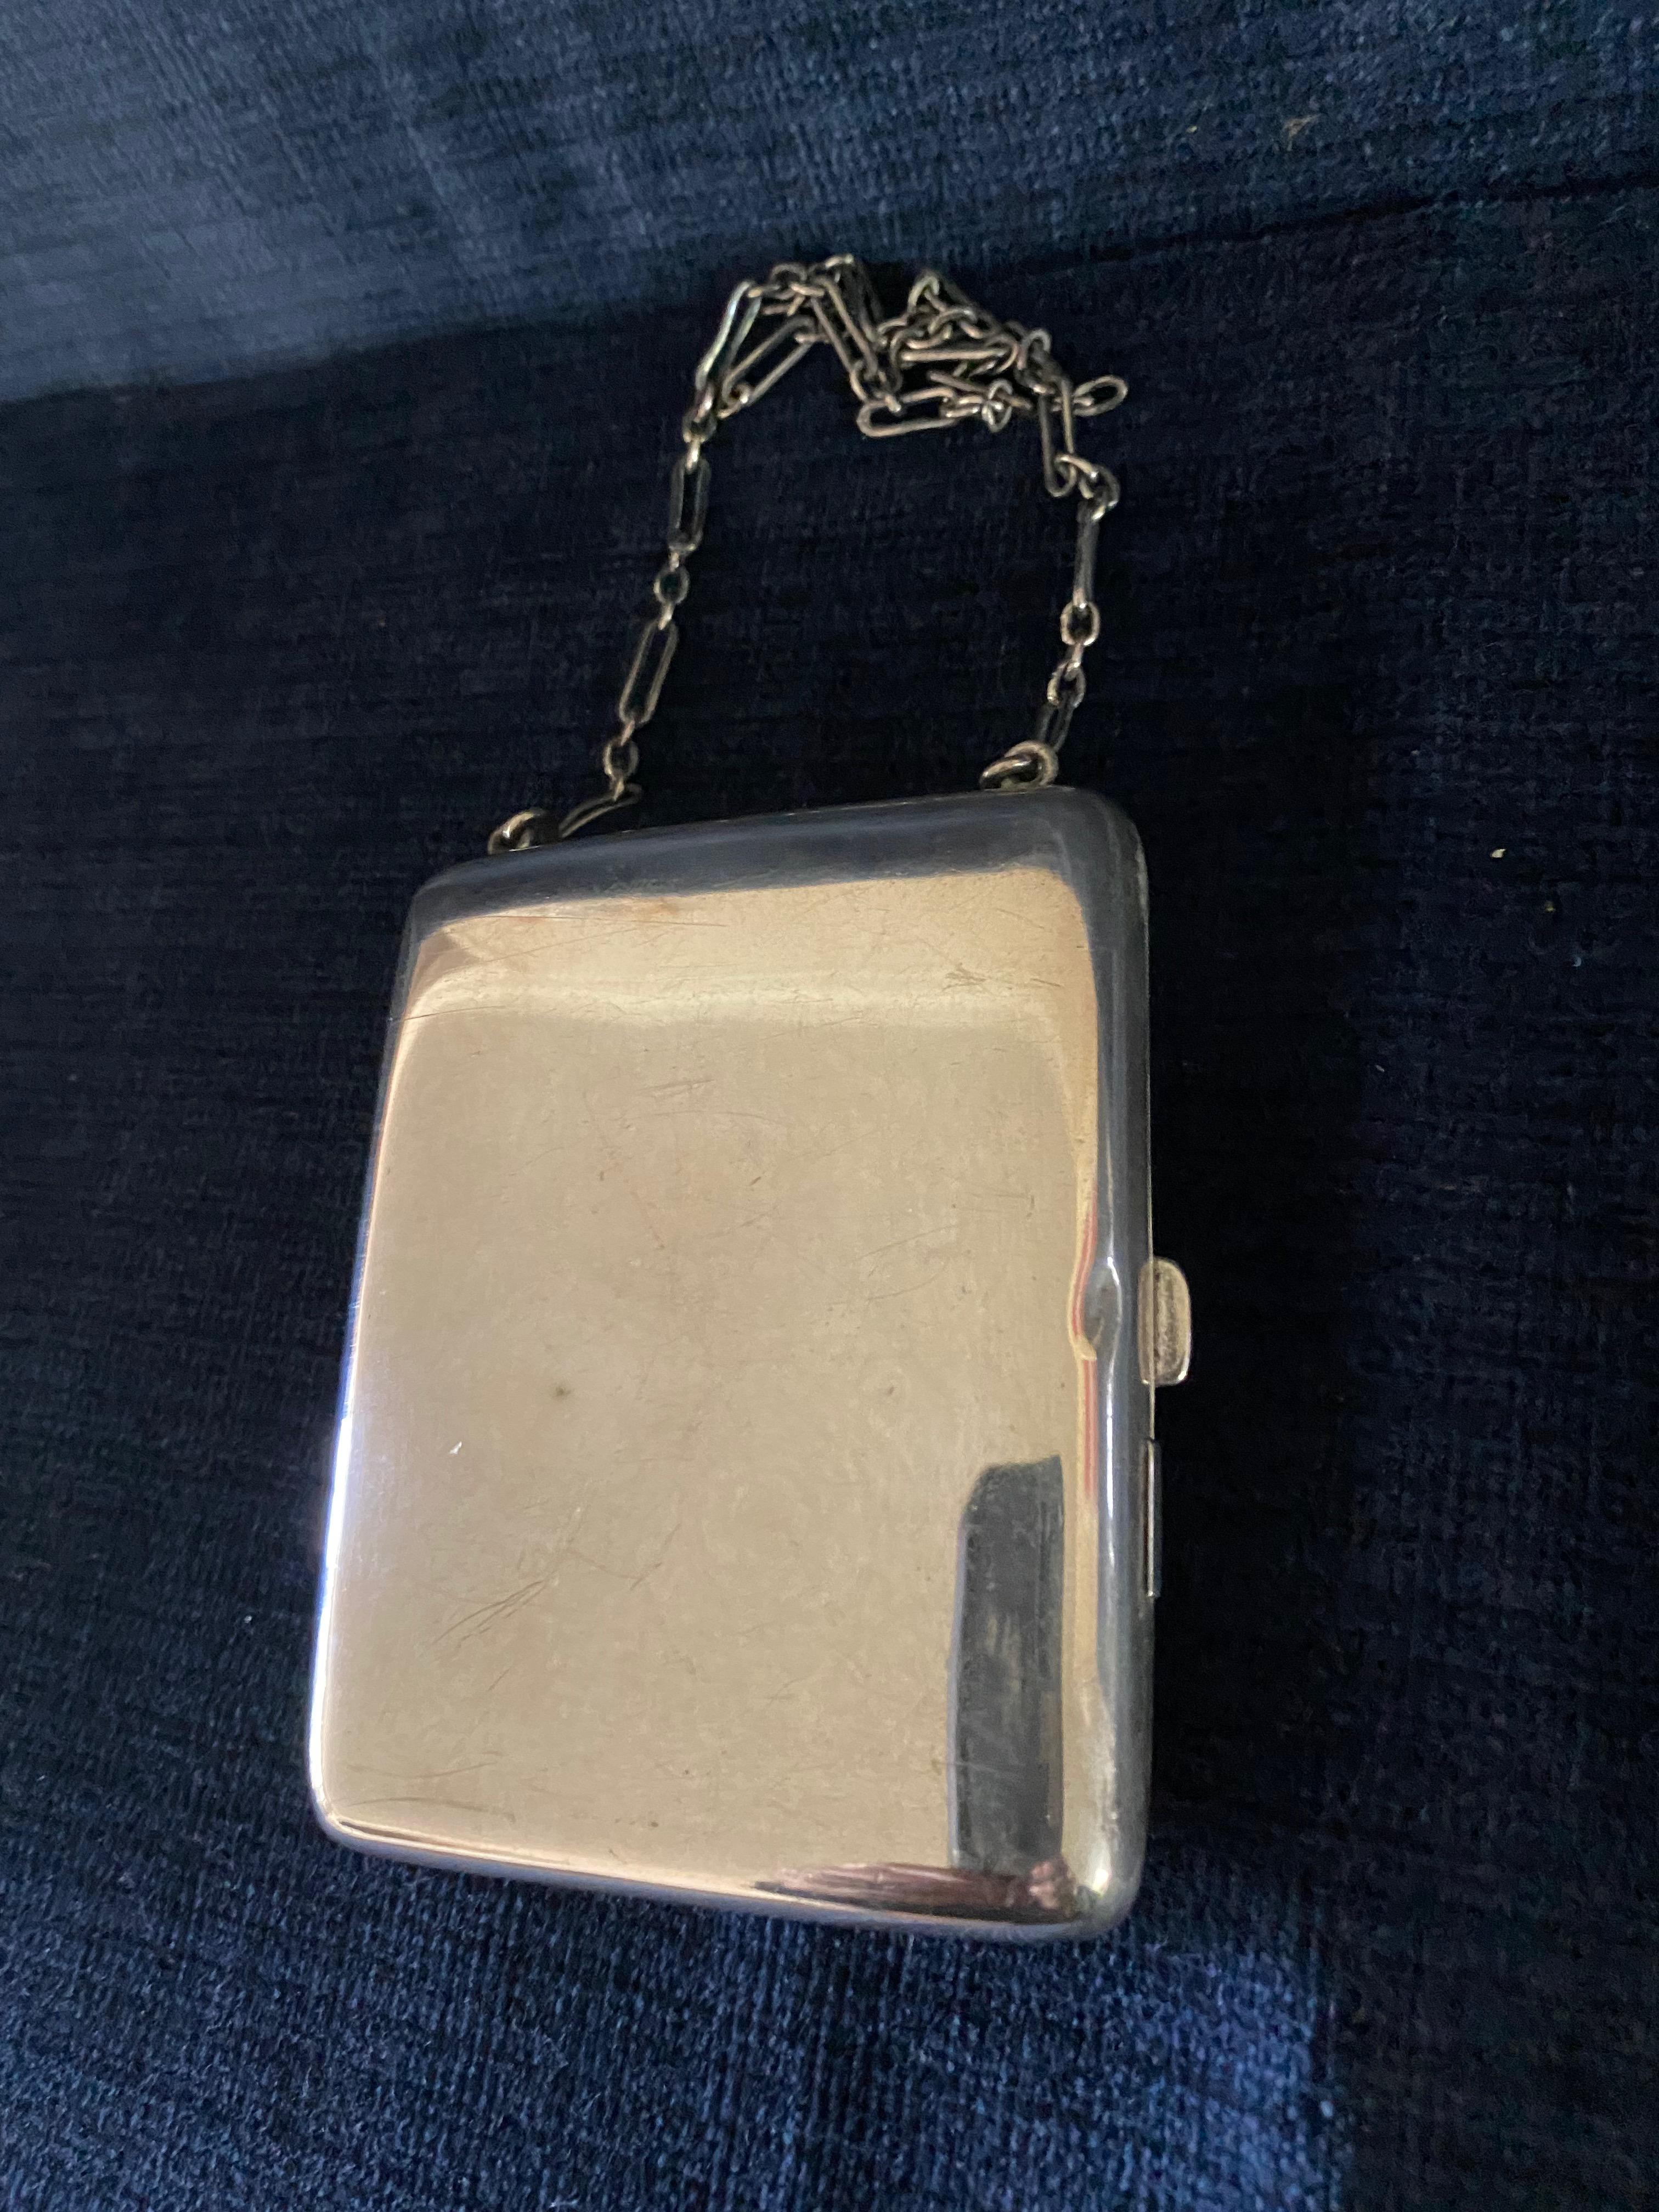 Sterling Silver Compact or Necessaire In Good Condition For Sale In Pasadena, CA